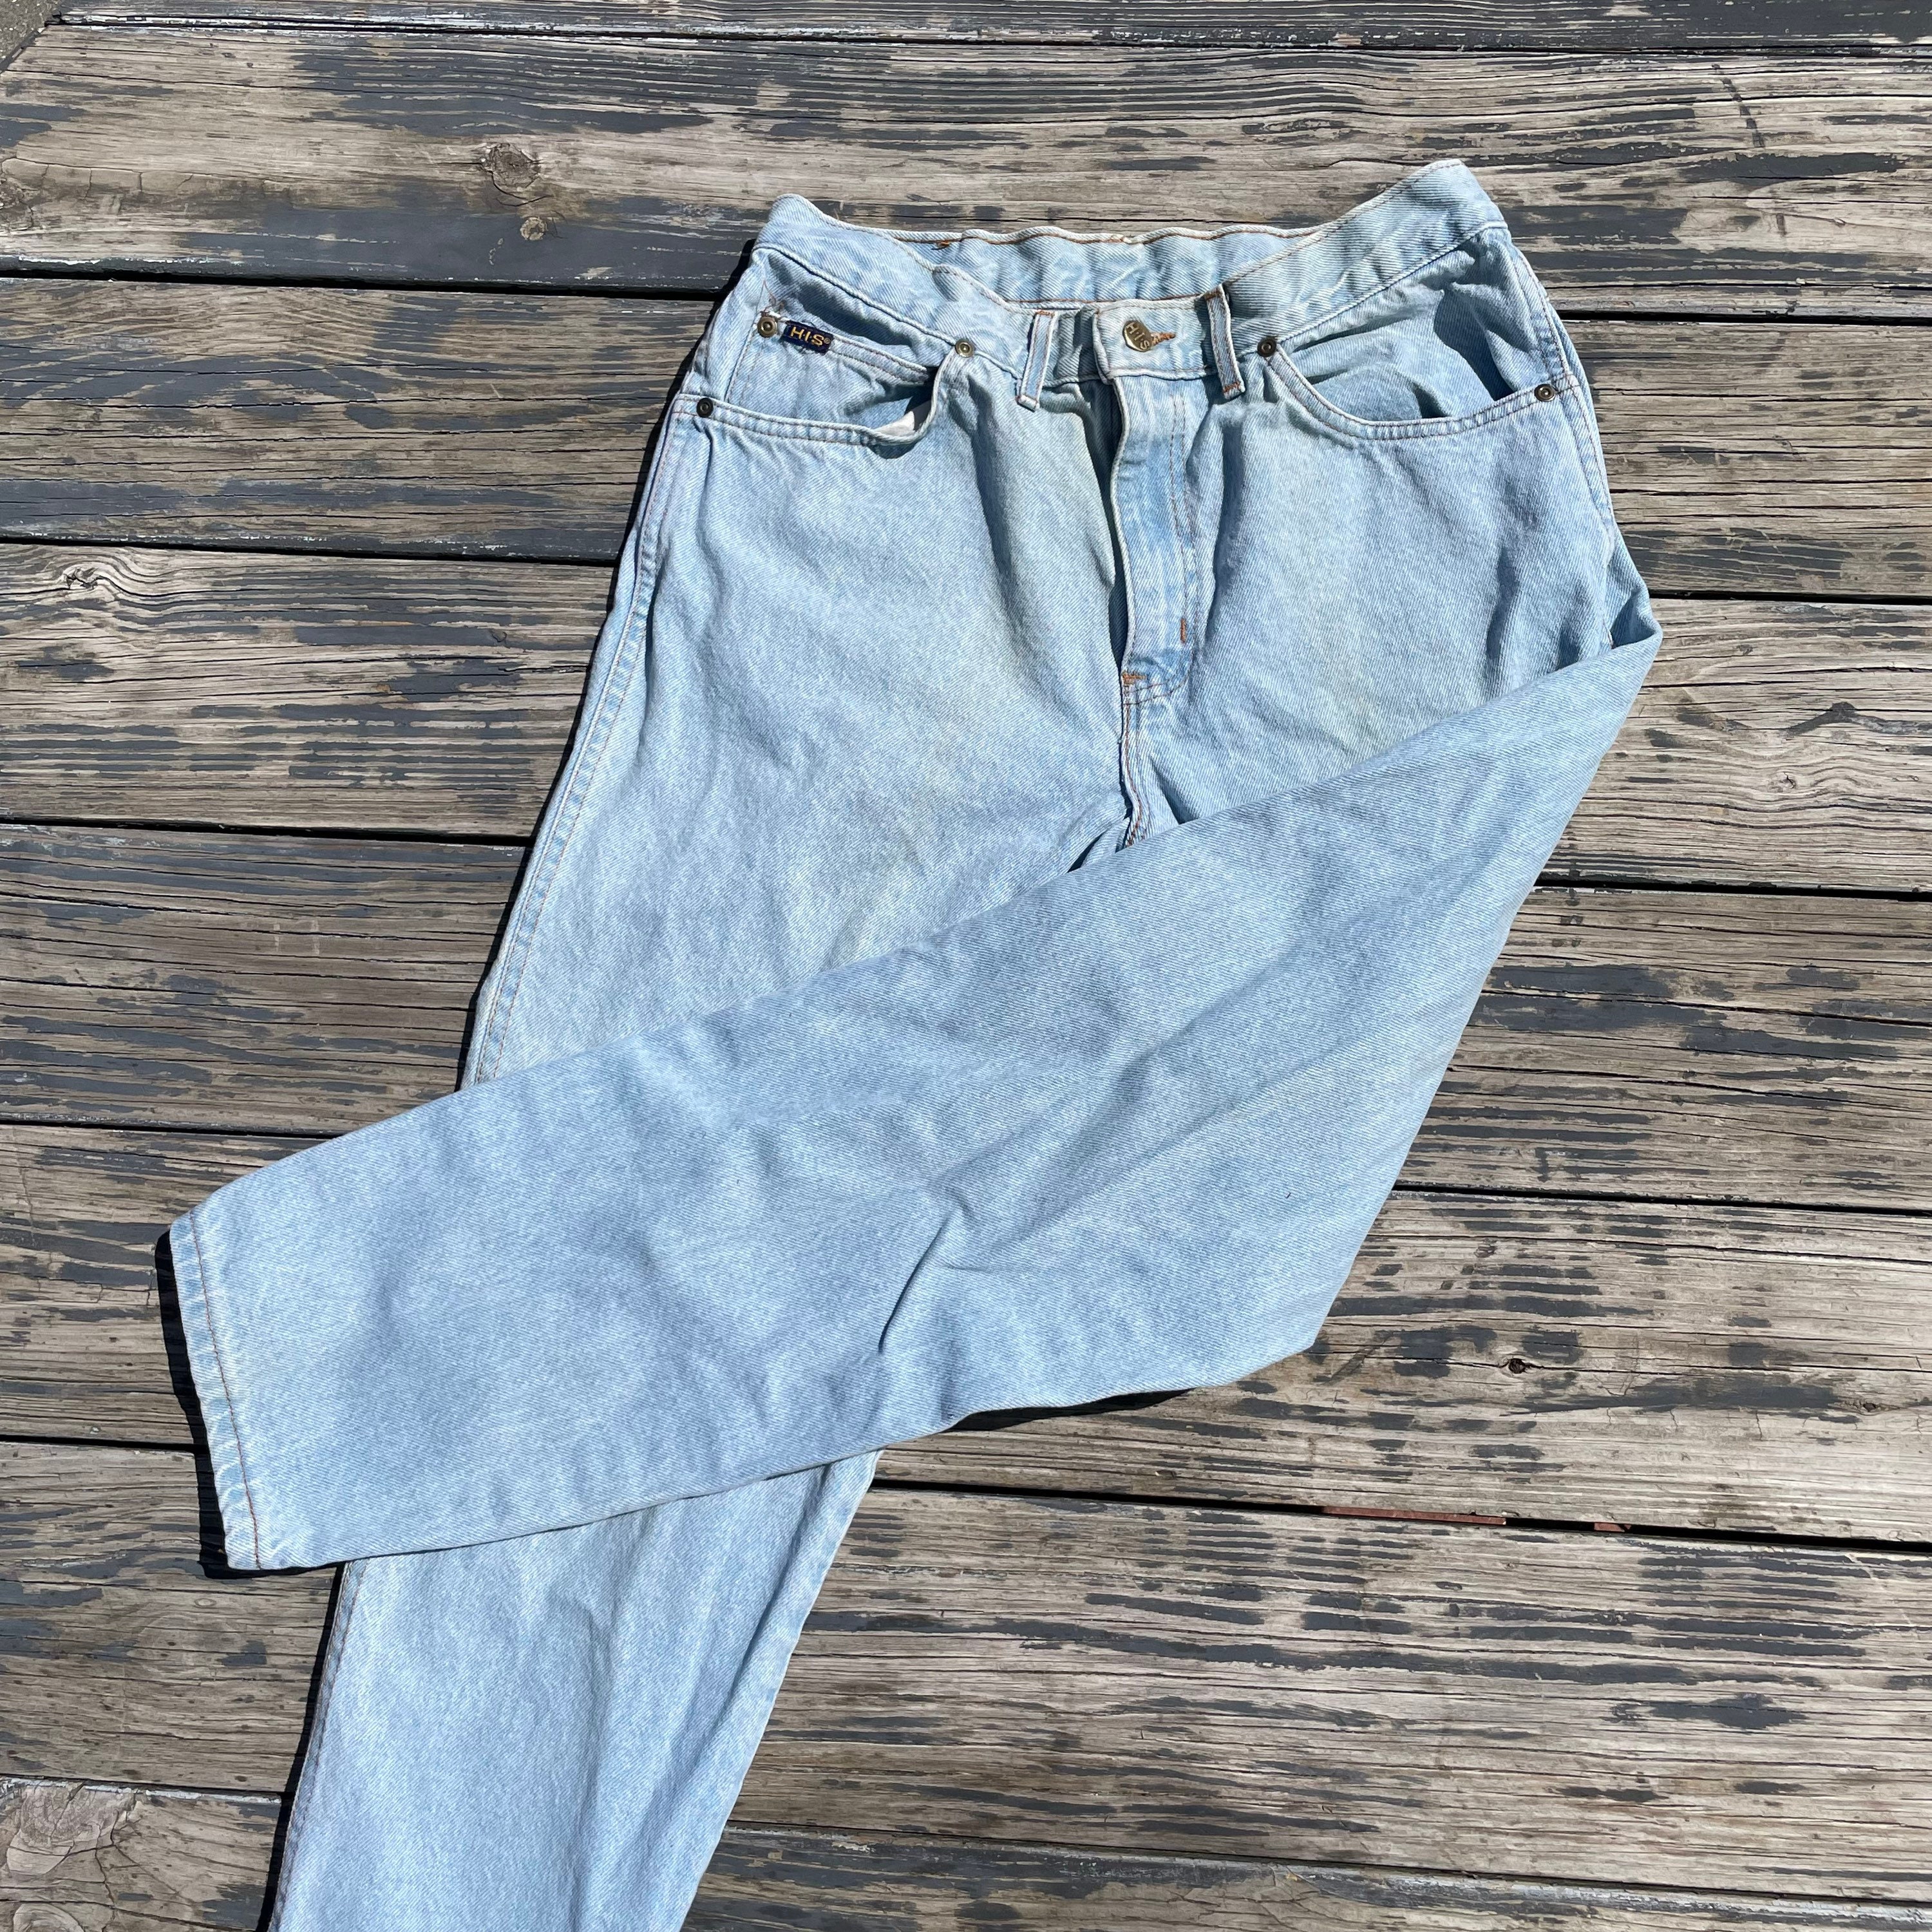 Vintage His Jeans - Etsy